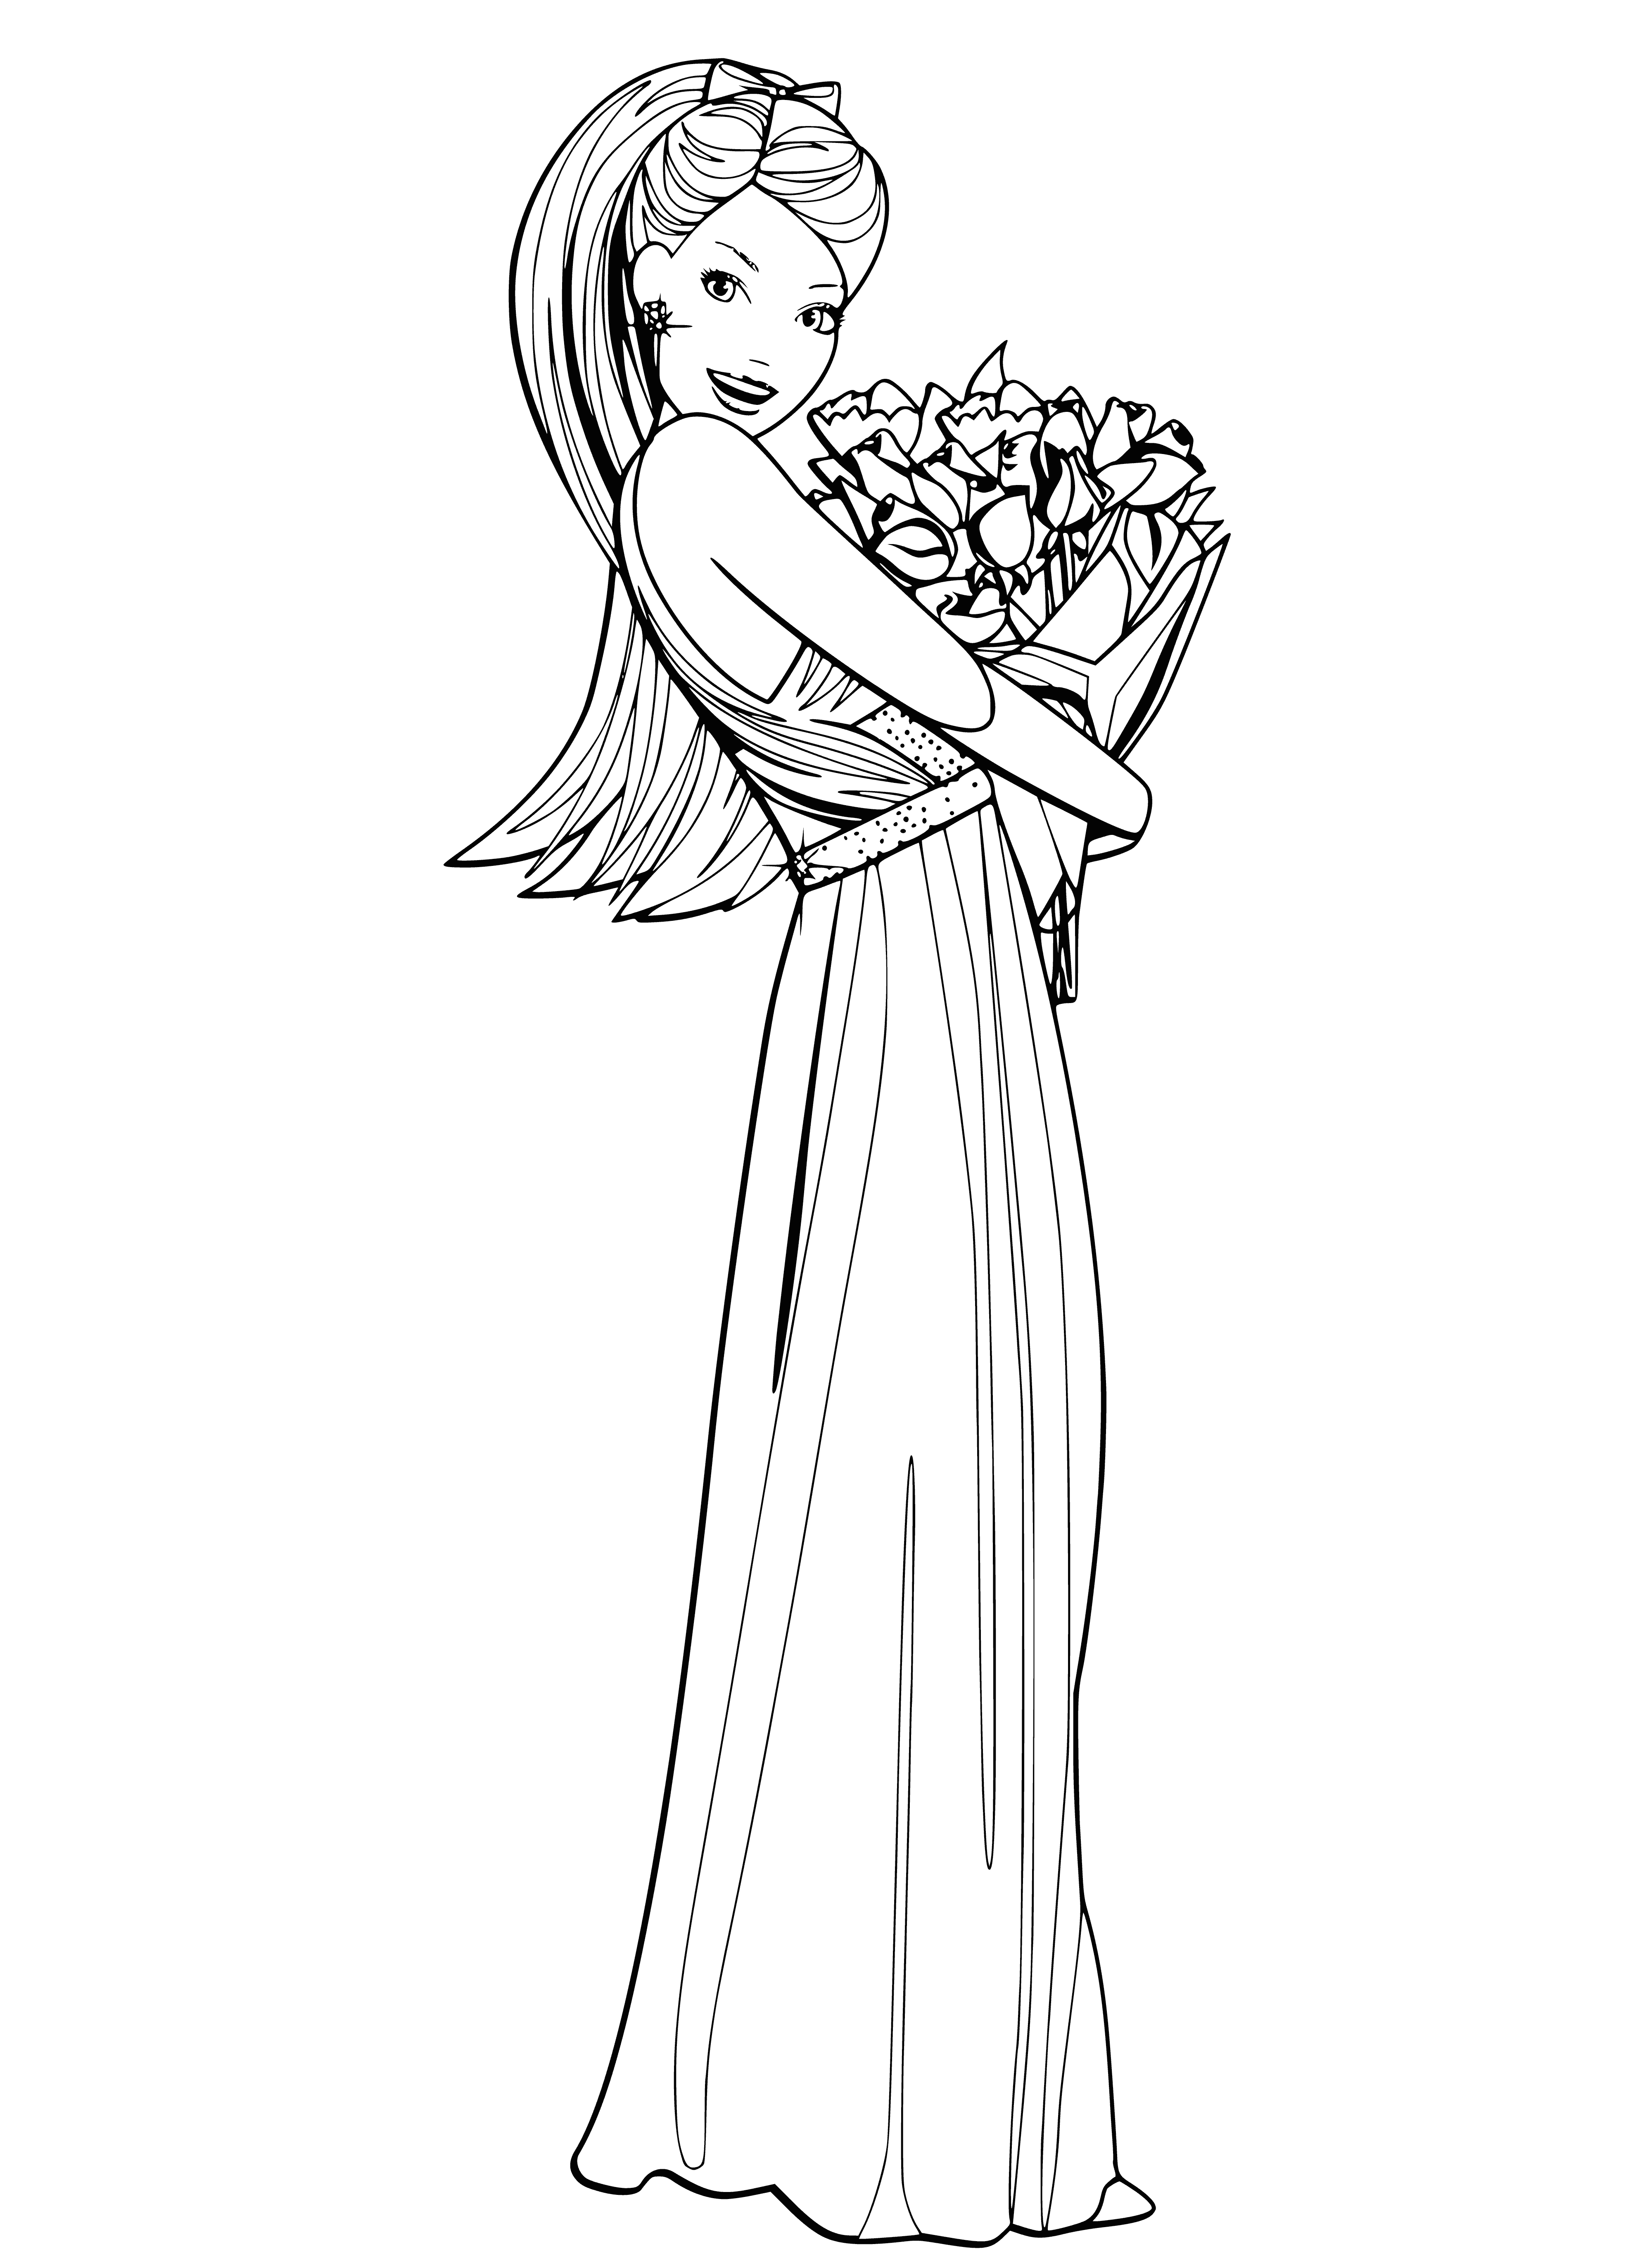 Barbie holding a bouquet of roses coloring page